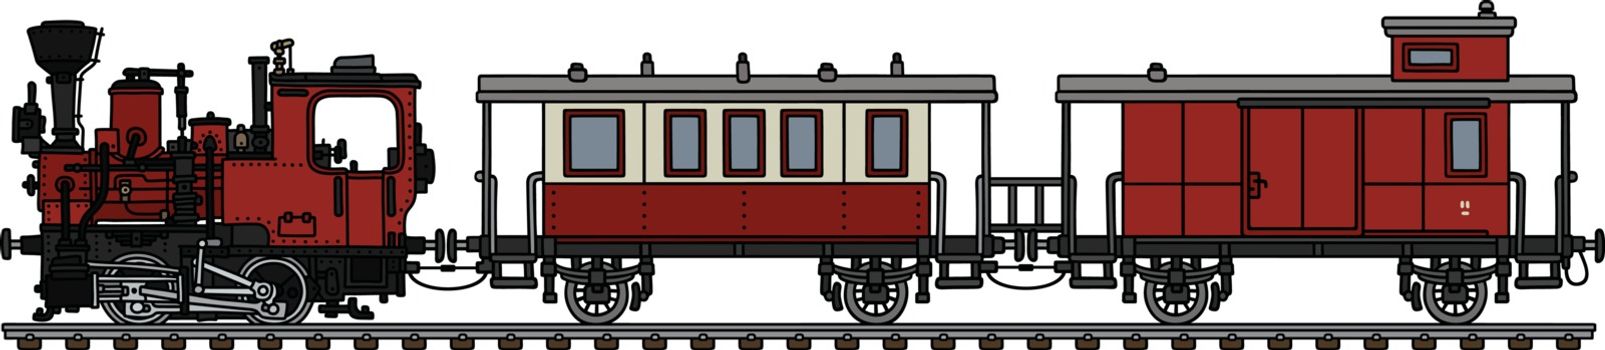 The vectorized hand drawing of a vintage red small steam train